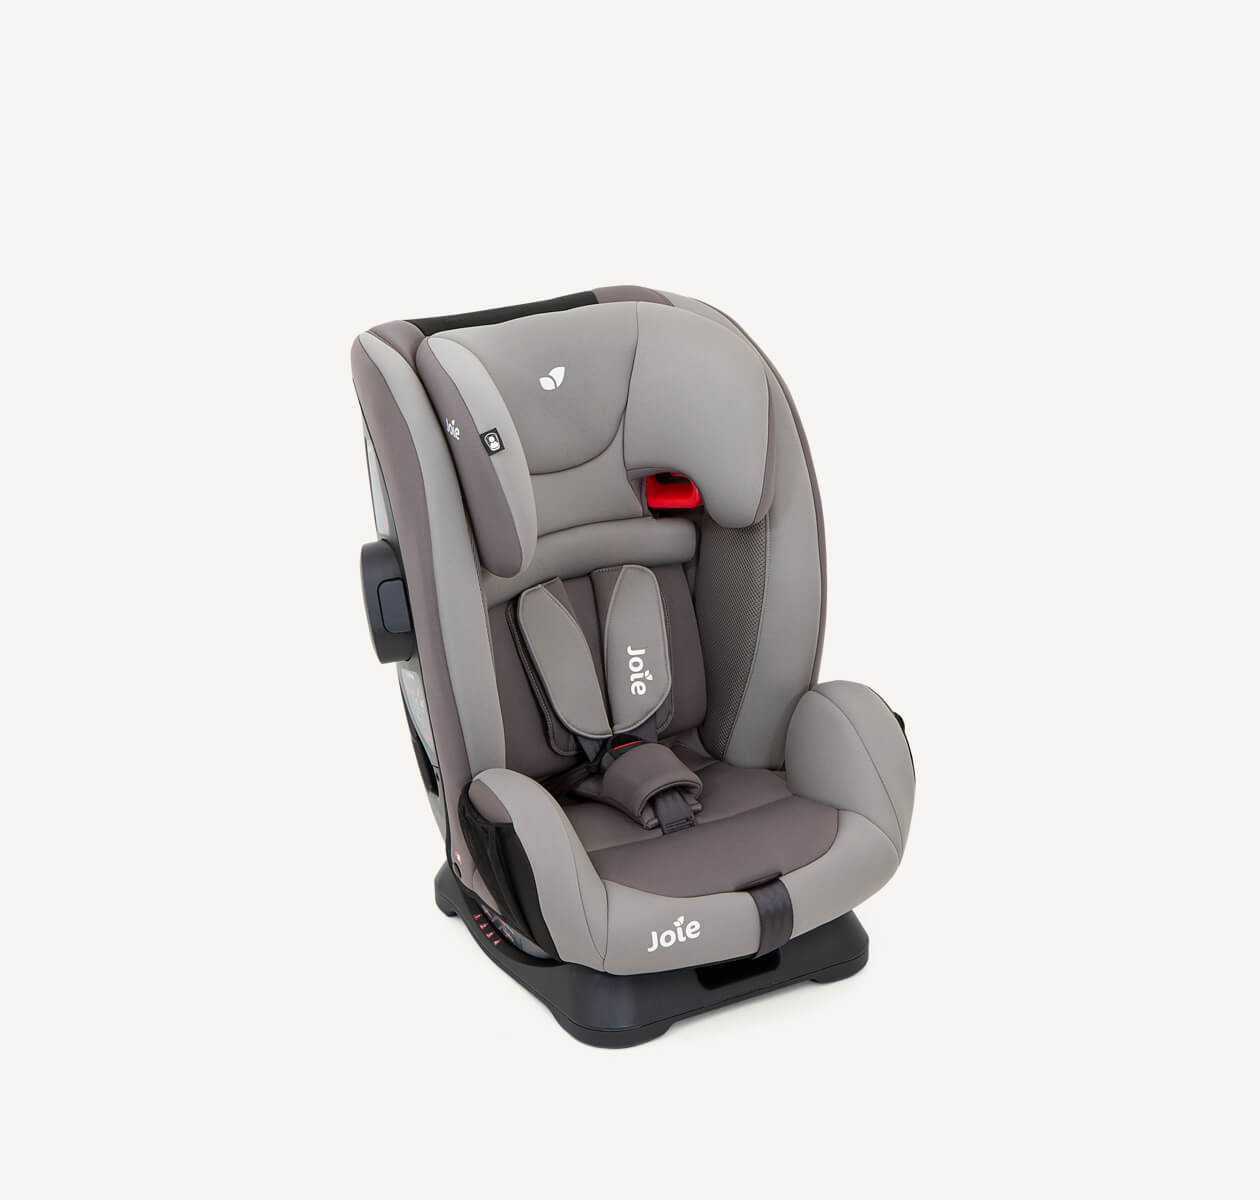 Joie fortifi child car seat in two-tone gray facing at a right angle with the headrest fully lowered.